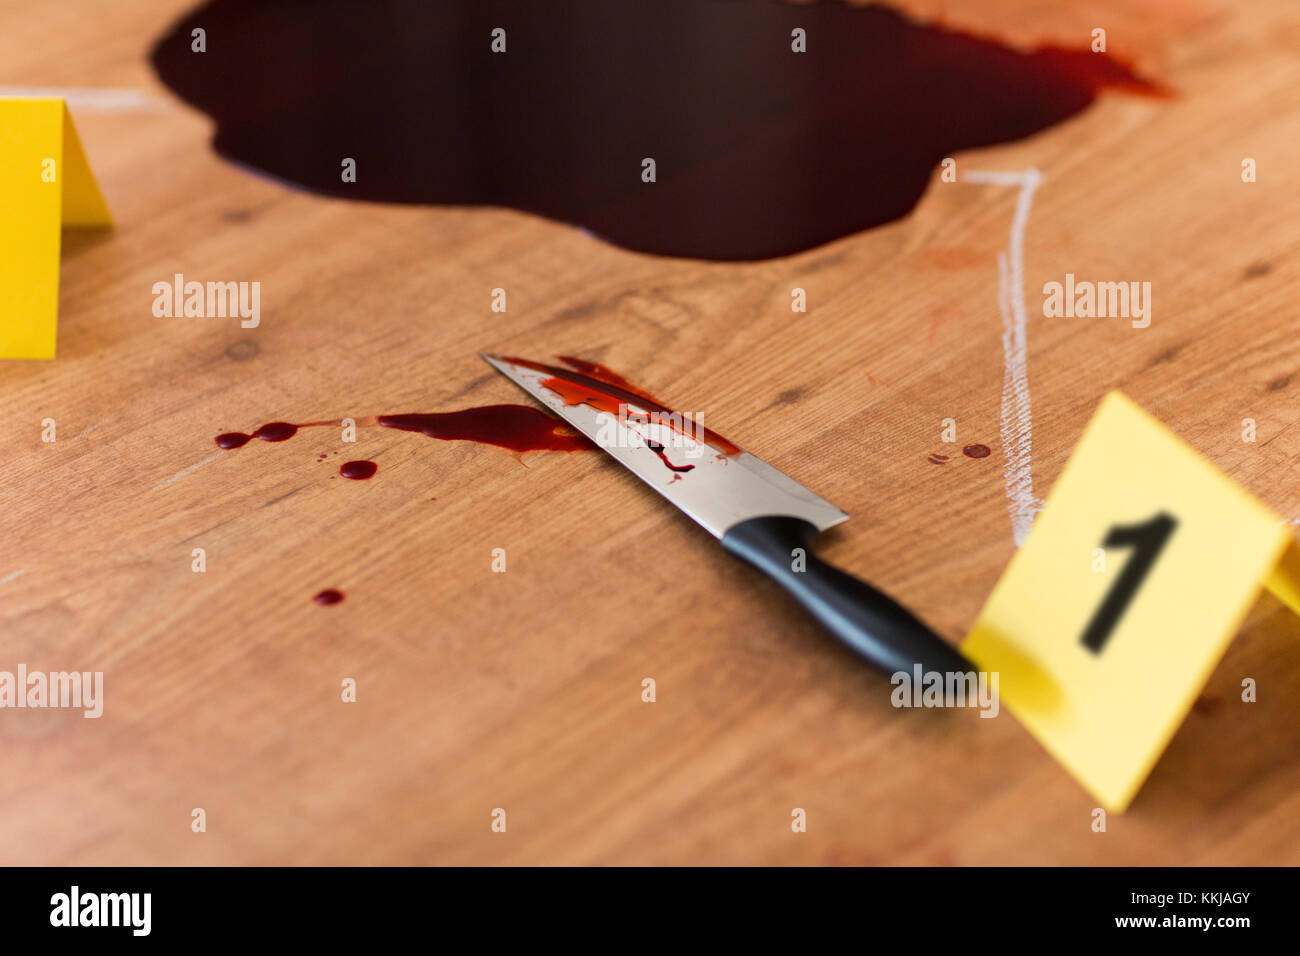 knife in blood and chalk outline at crime scene Stock Photo